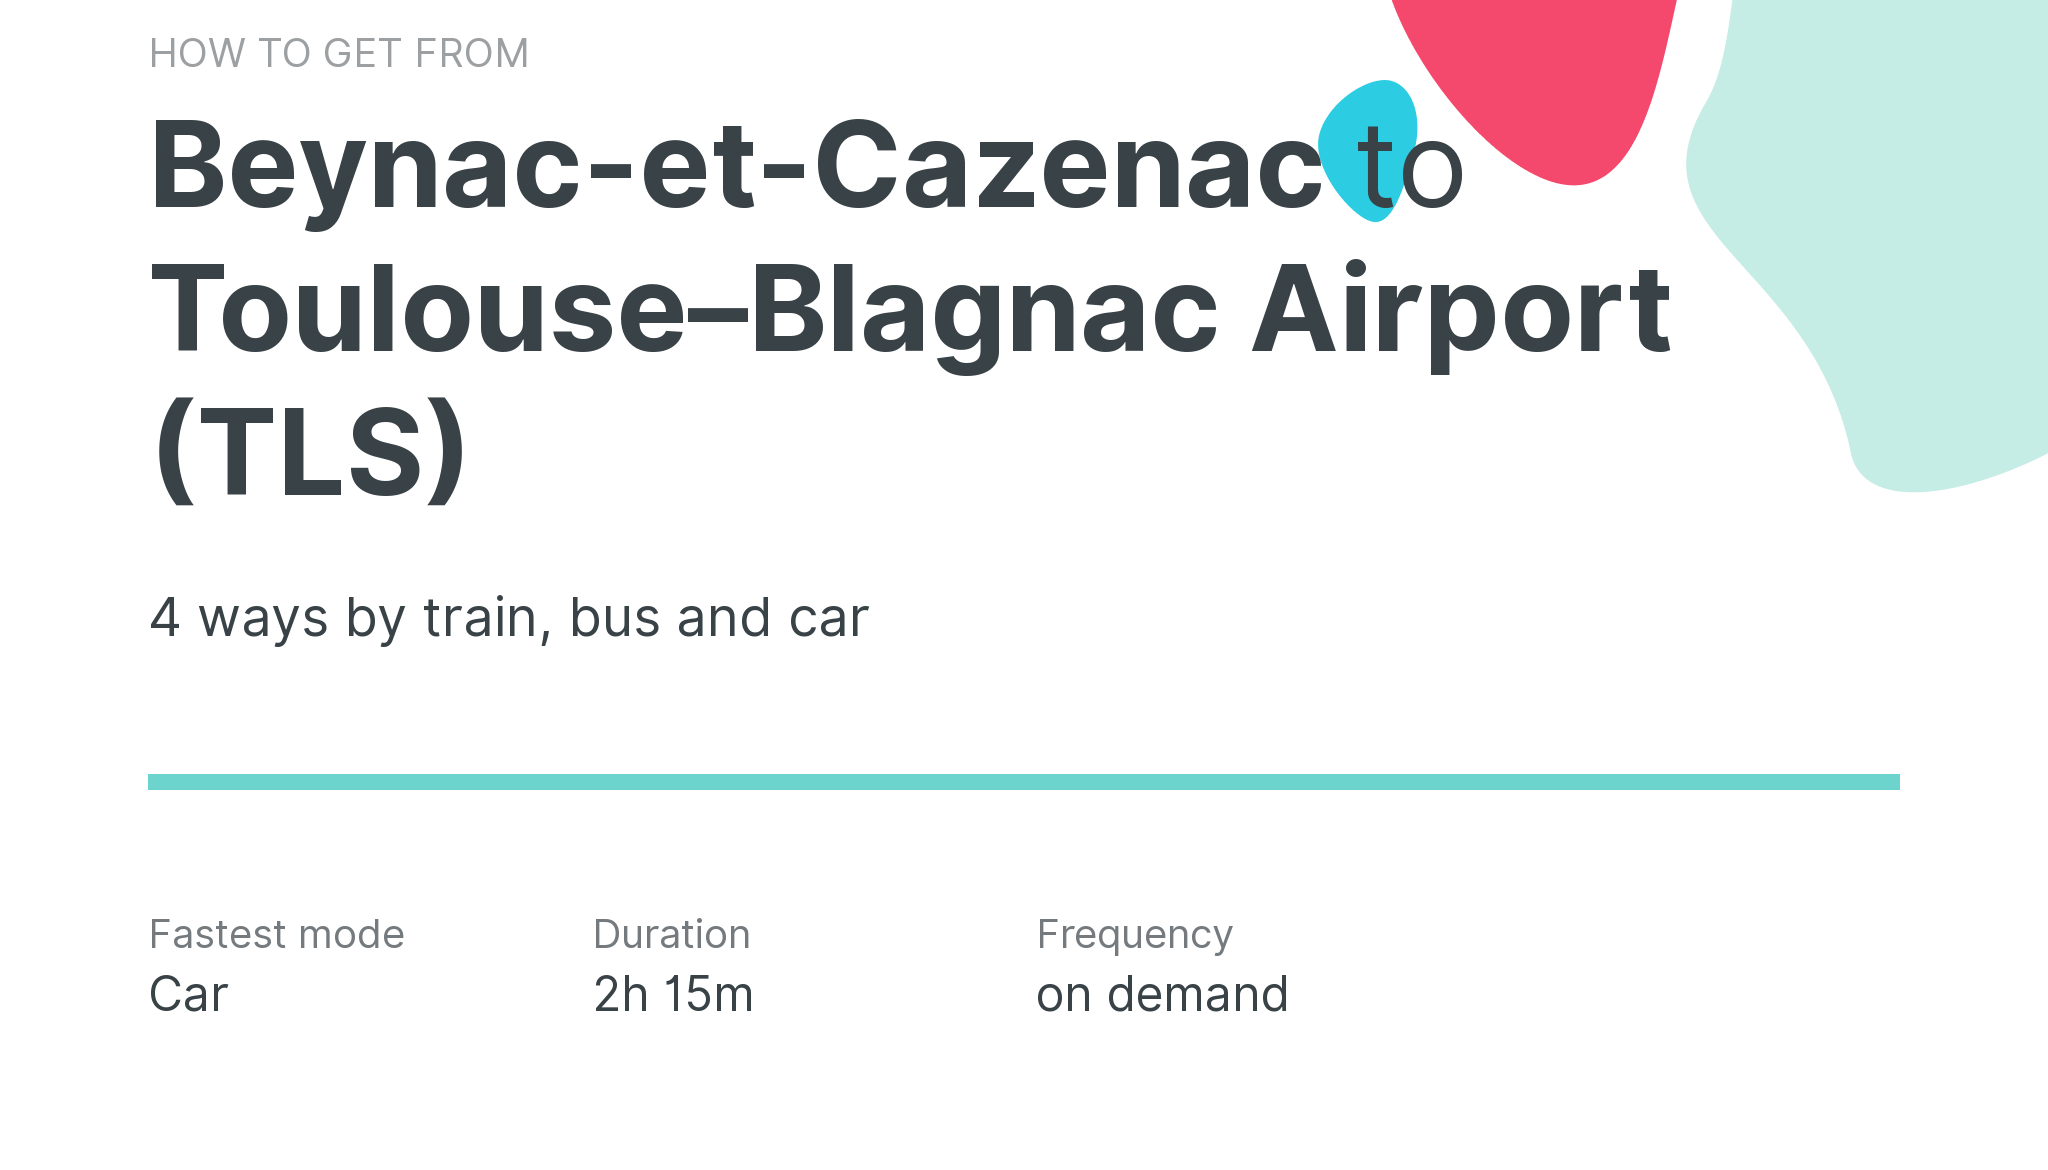 How do I get from Beynac-et-Cazenac to Toulouse–Blagnac Airport (TLS)